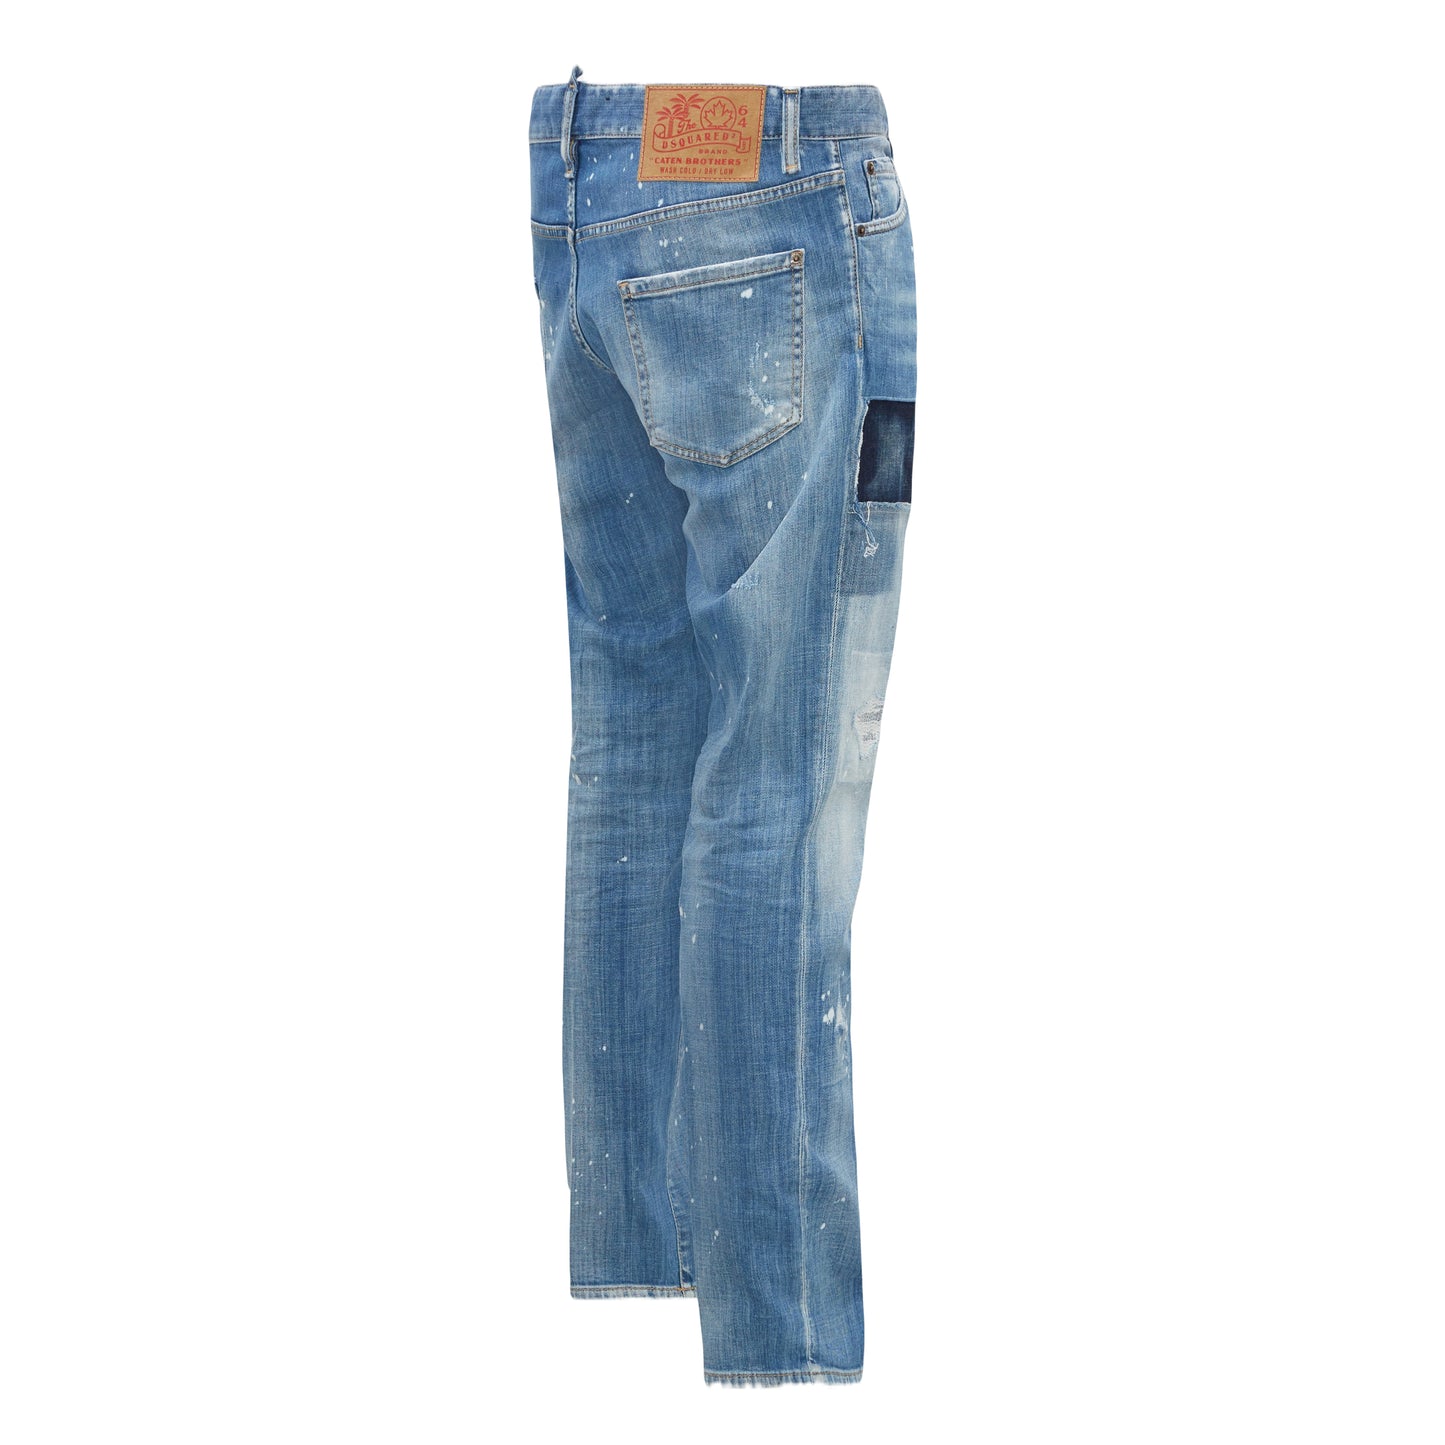 DSquared2 S74LB1252 Cool Guy Jeans